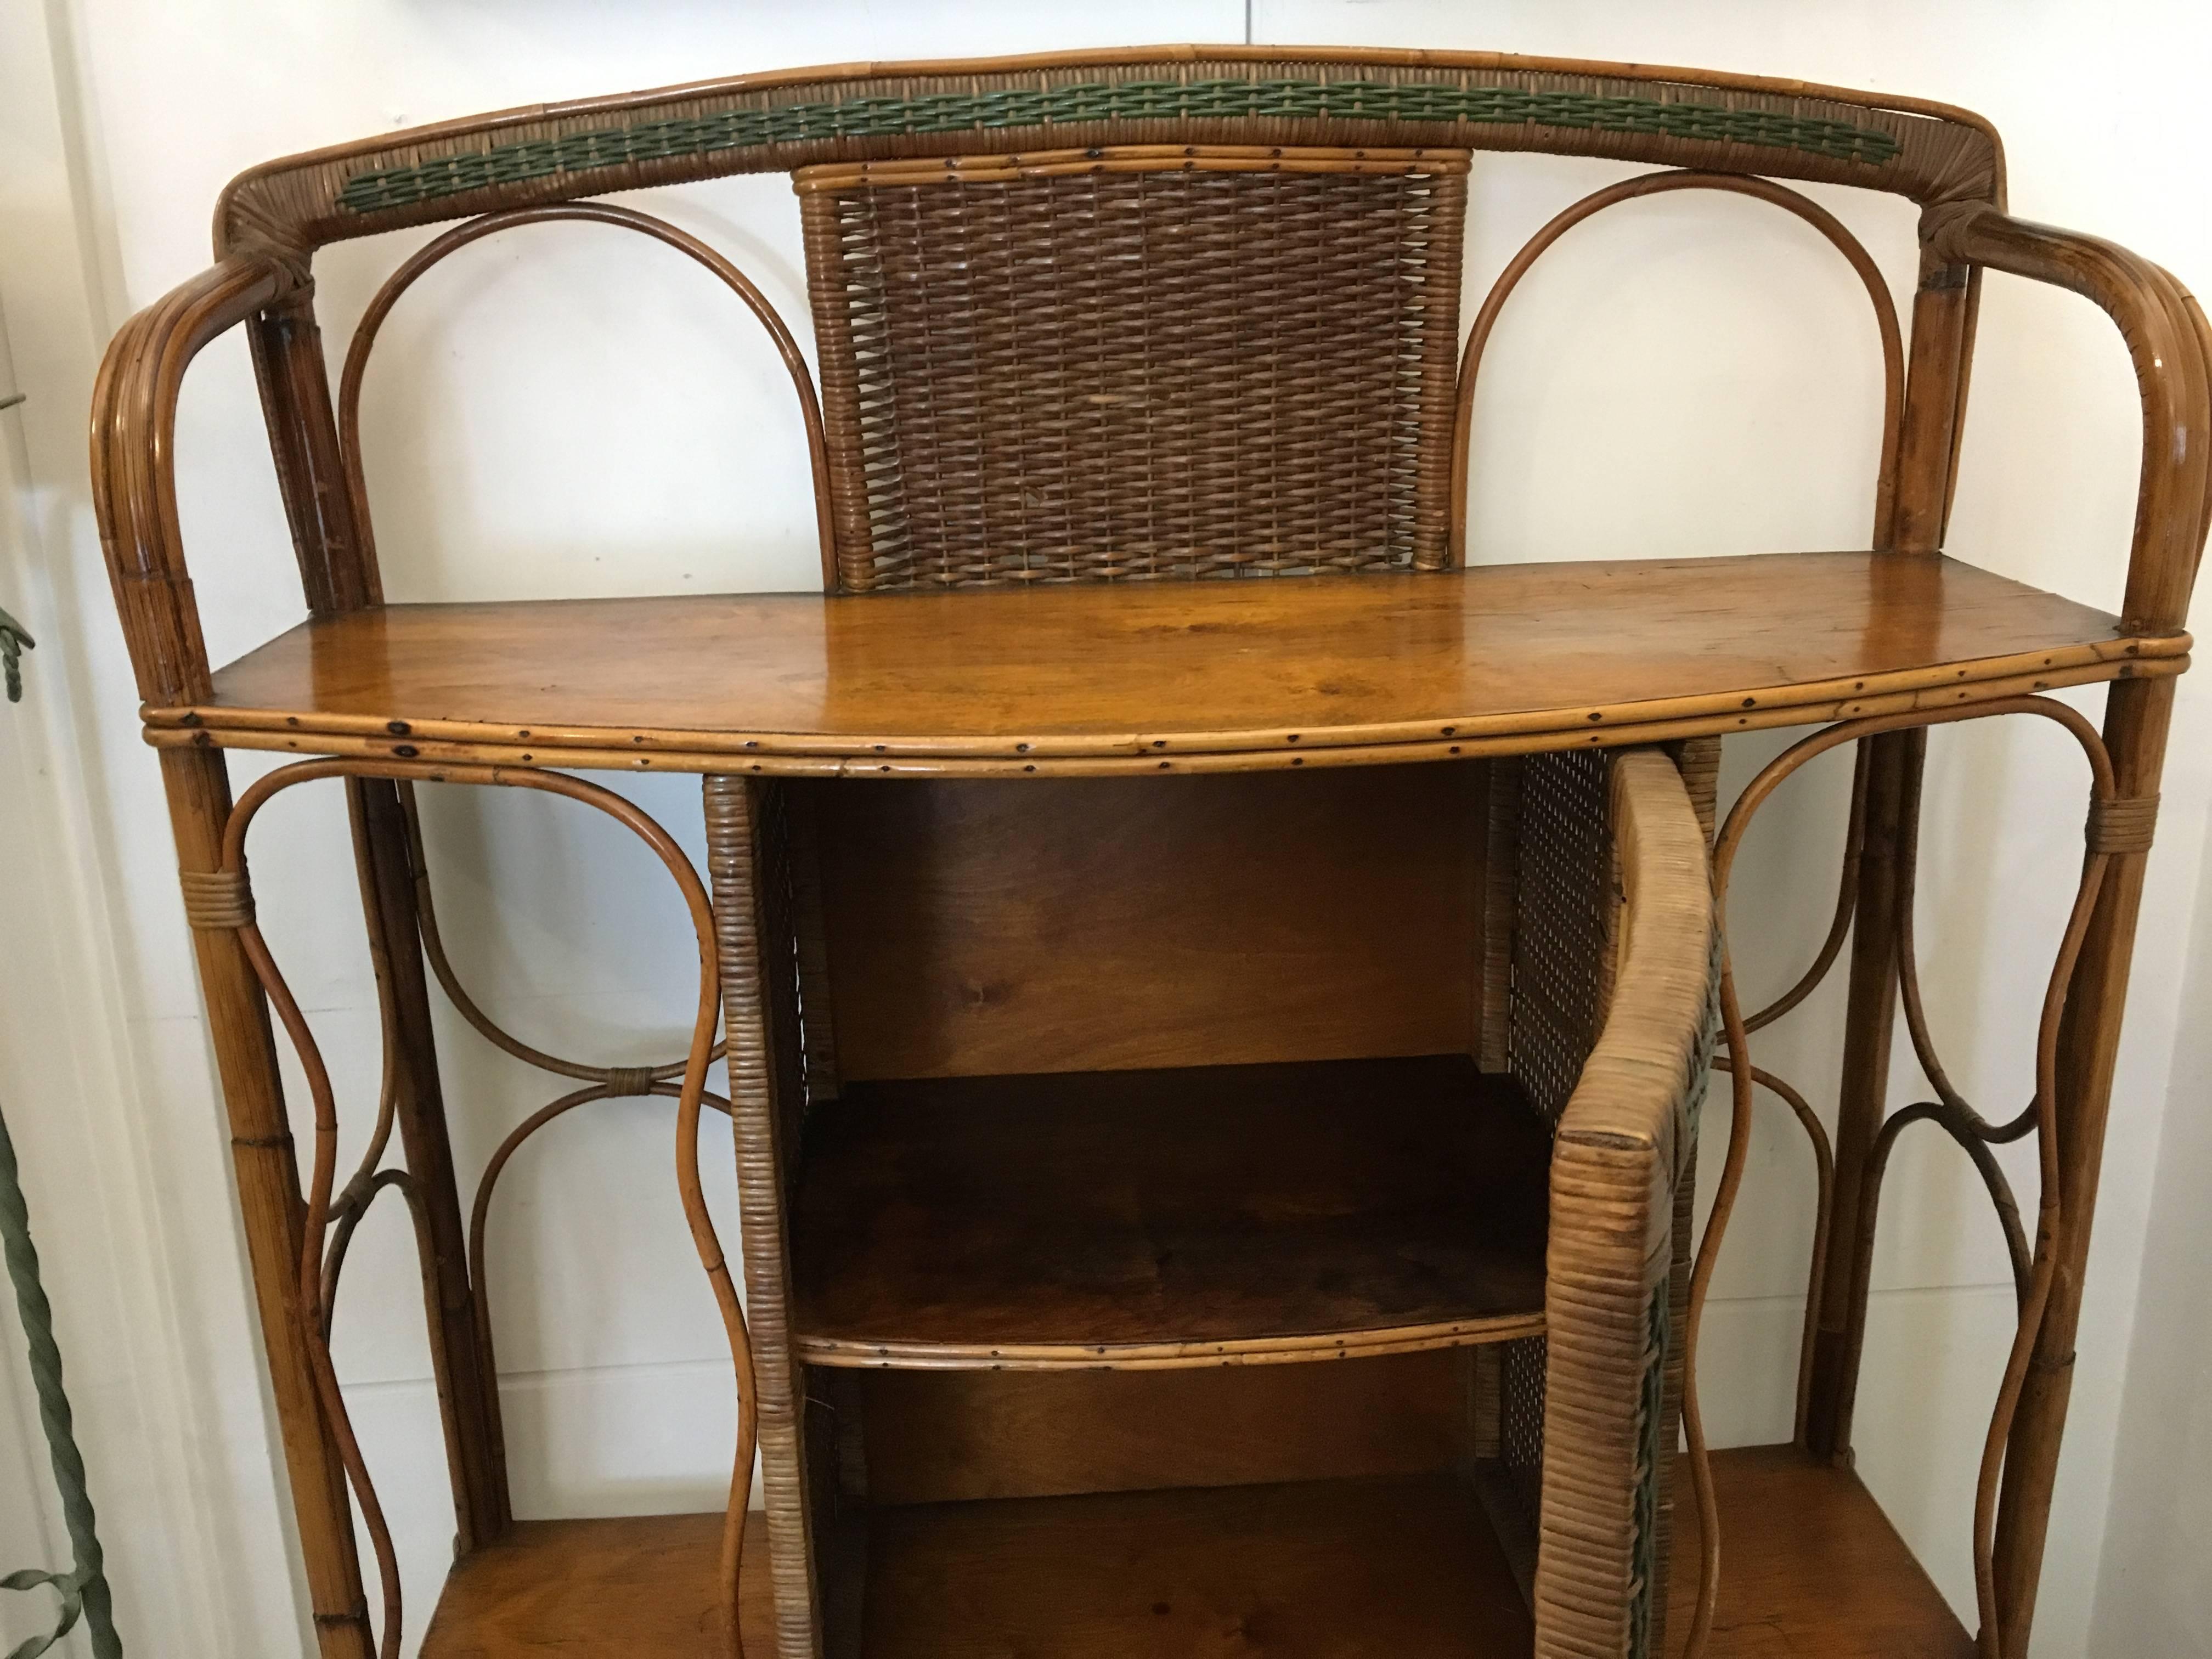 20th Century Wicker Rattan Midcentury Cabinet Colonial Style 